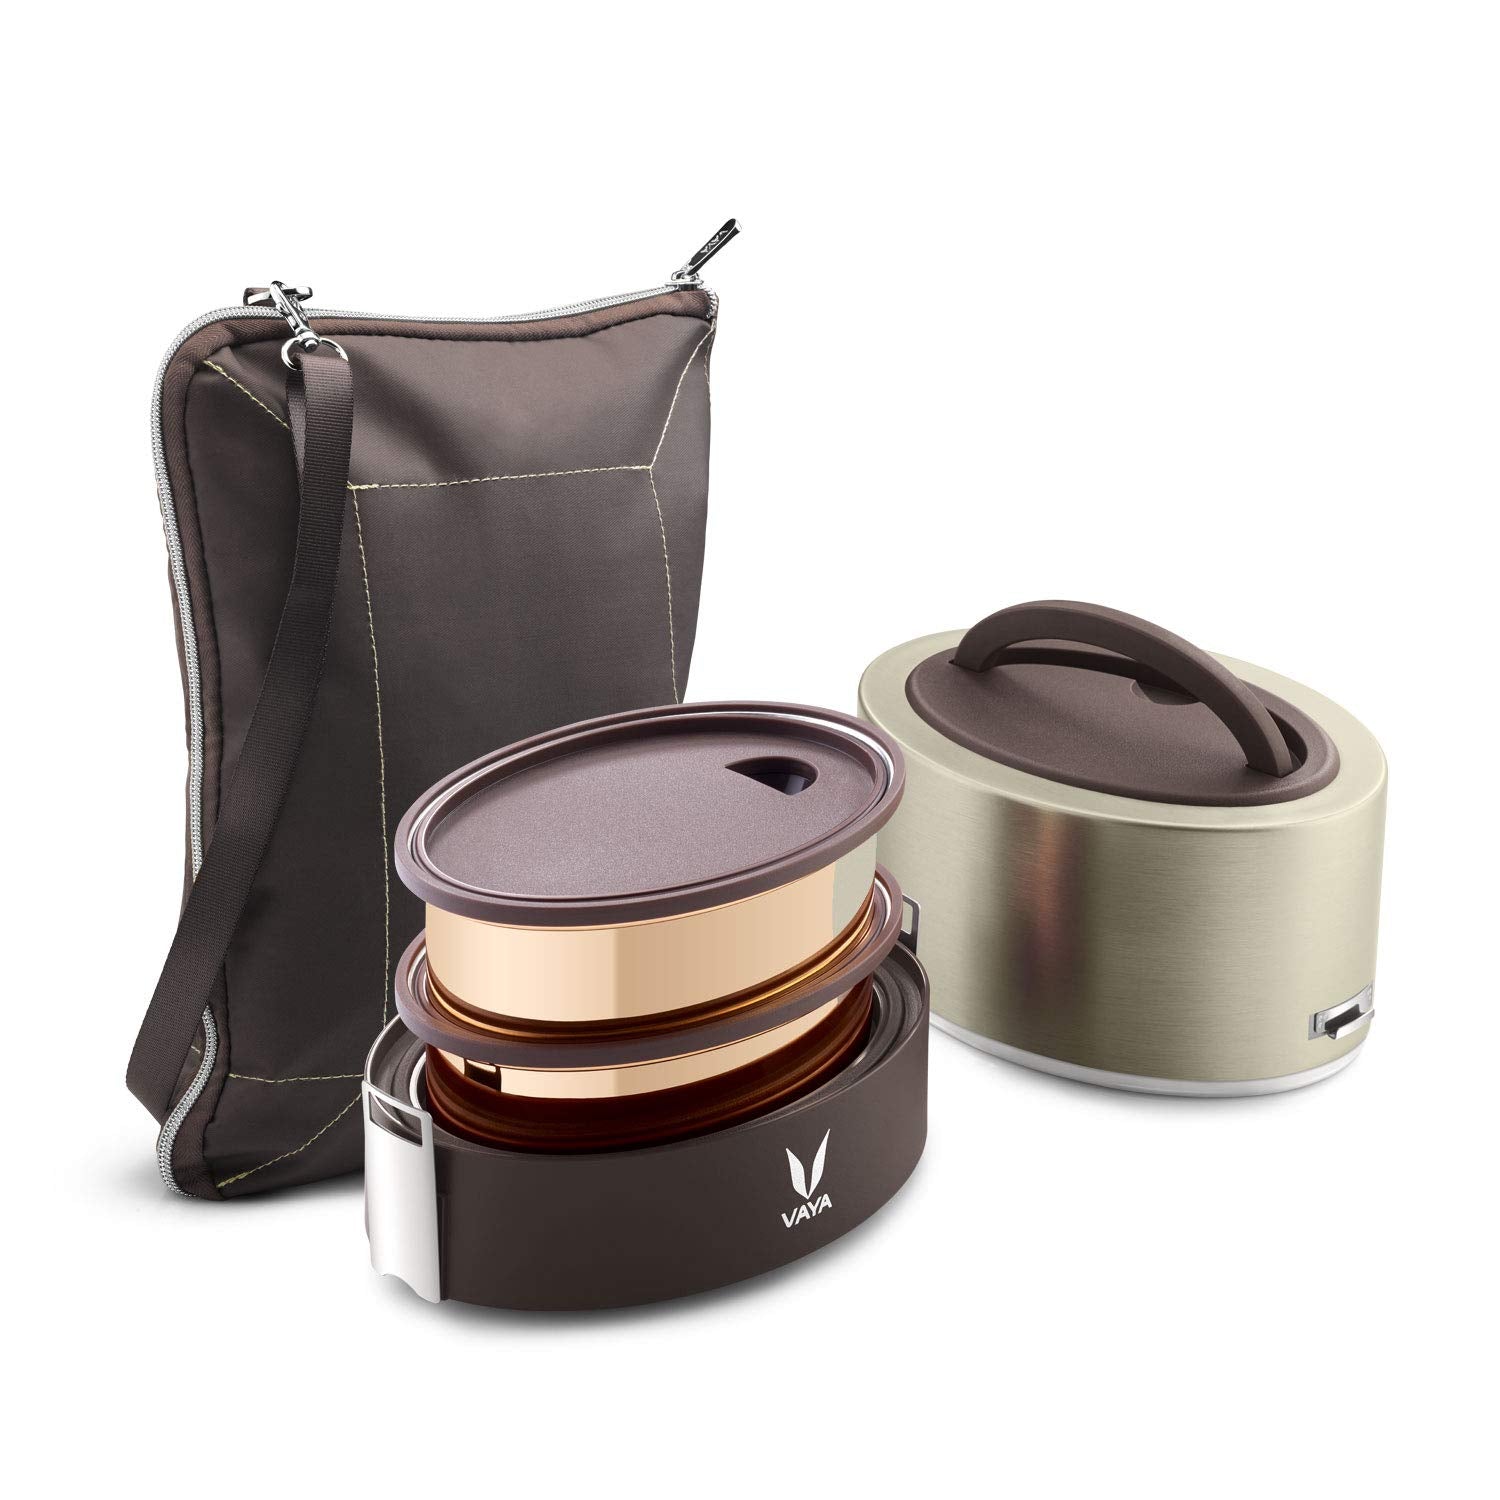 Vaya Tyffyn Graphite Copper-Finished Stainless Steel Lunch Box for Kid